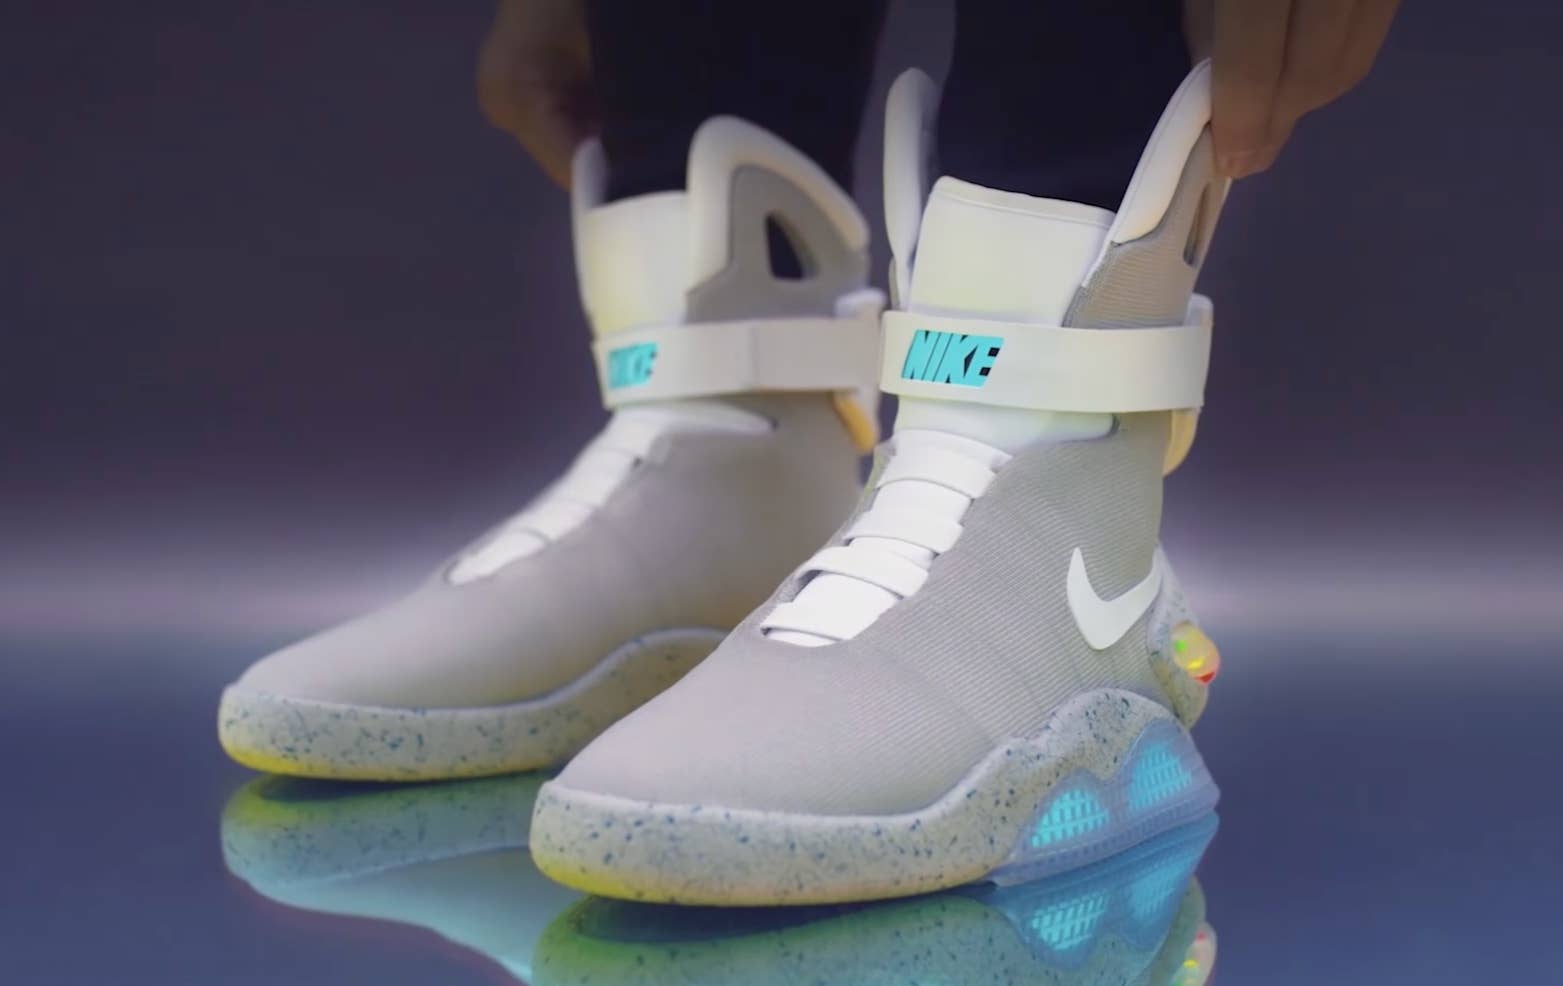 Watch This Guy Unbox His Nike Mags and Put Them on His Feet | Complex